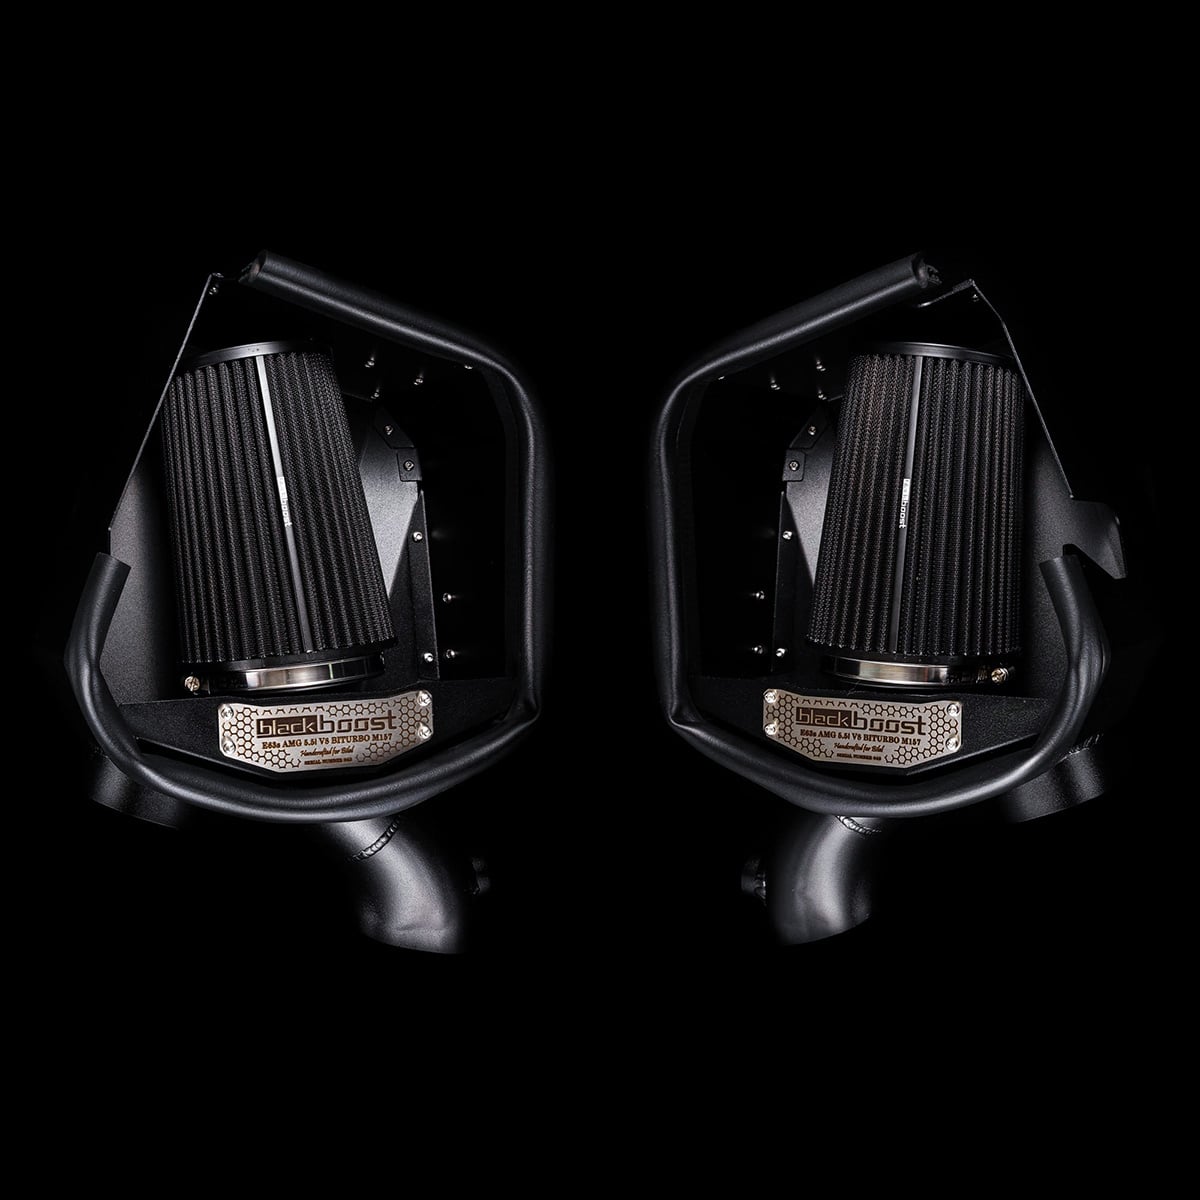 Blackboost | Cold Air Intake System | Mercedes-Benz AMG M157 E63/E63S (212), CLS63/S (218), M278 CLS500/CLS550